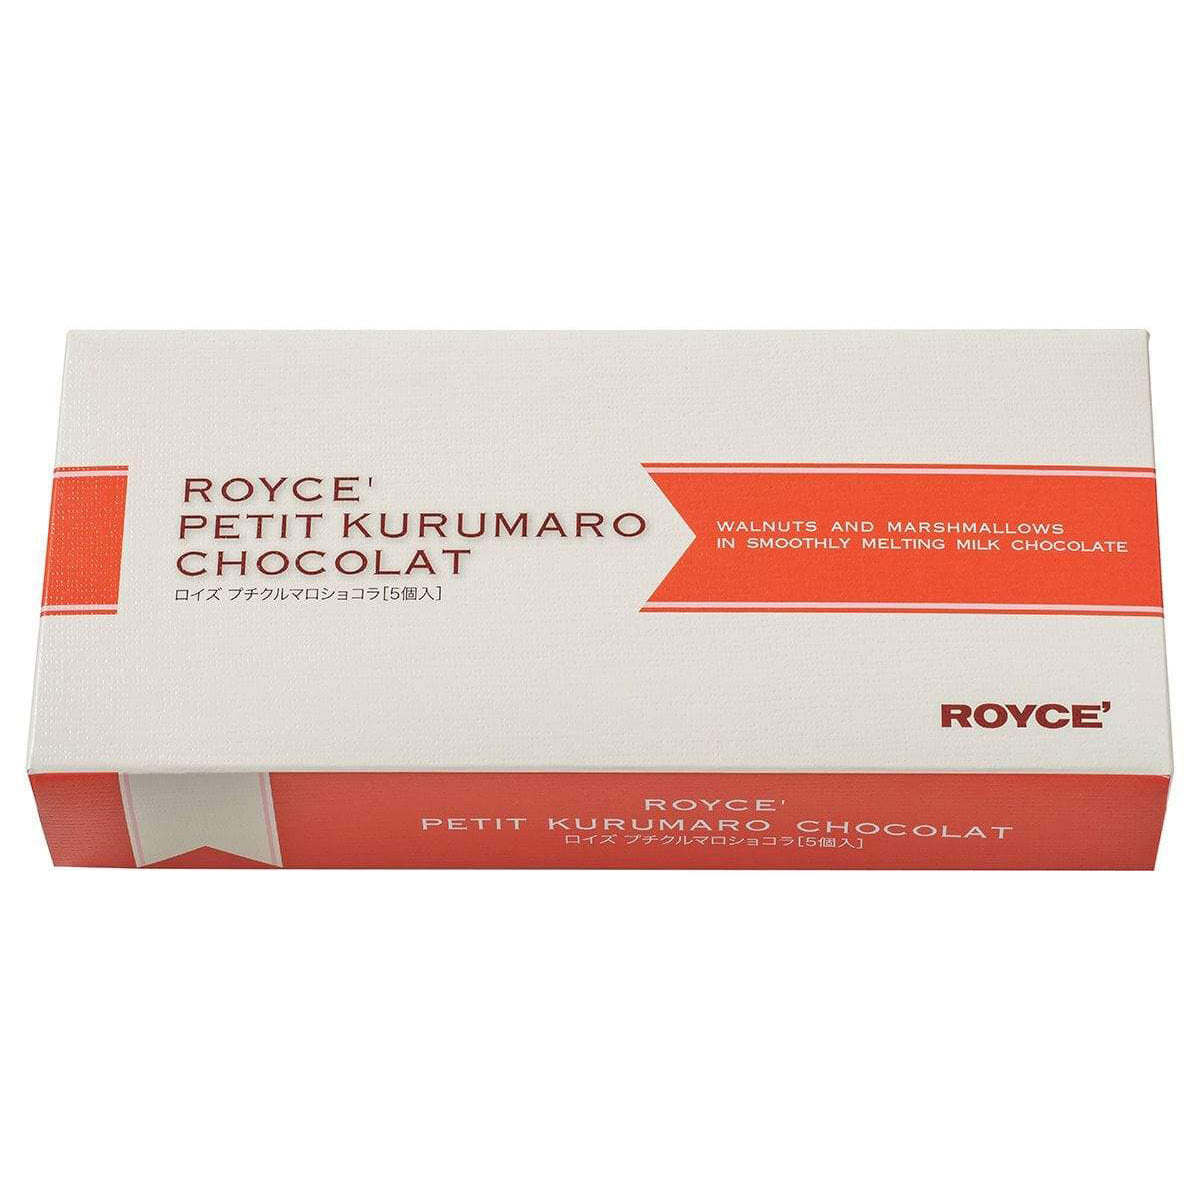 ROYCE' Chocolate - Petit Kurumaro Chocolat (5 Pcs) - Image shows white box with red accents. Text on top of box says ROYCE' Petit Kurumaro Chocolat Walnuts and Marshmallows In Smoothly Melting Milk Chocolate ROYCE'. Text on bottom says ROYCE' Petit Kurumaro Chocolat.